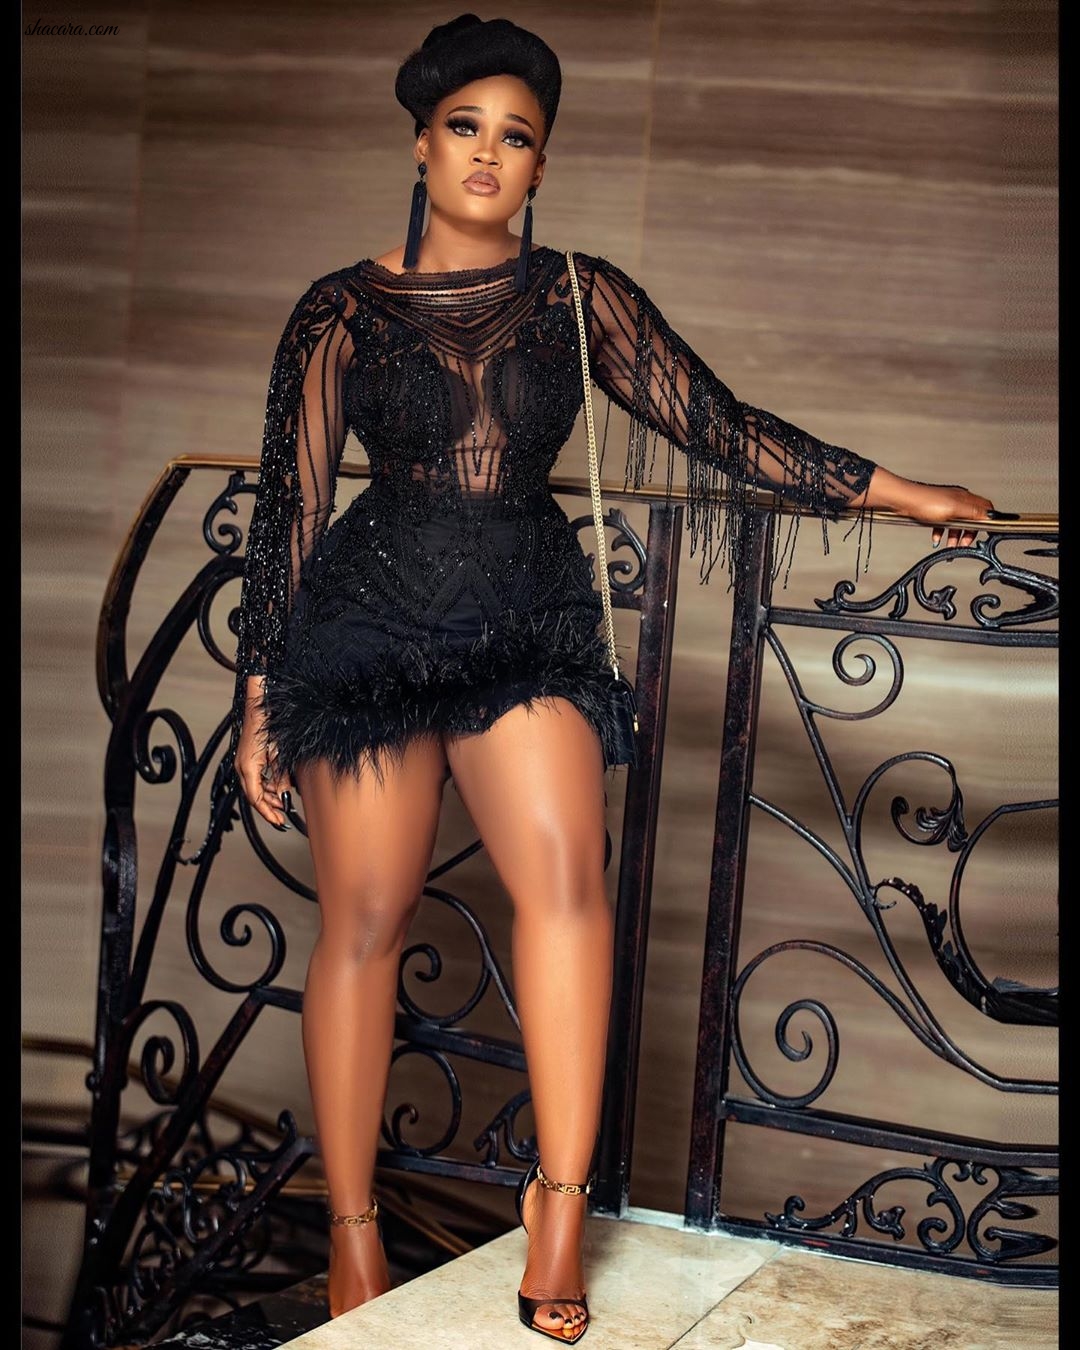 Outfit Change! Nollywood Stars Dazzle At The 2020 AMVCA After-Party